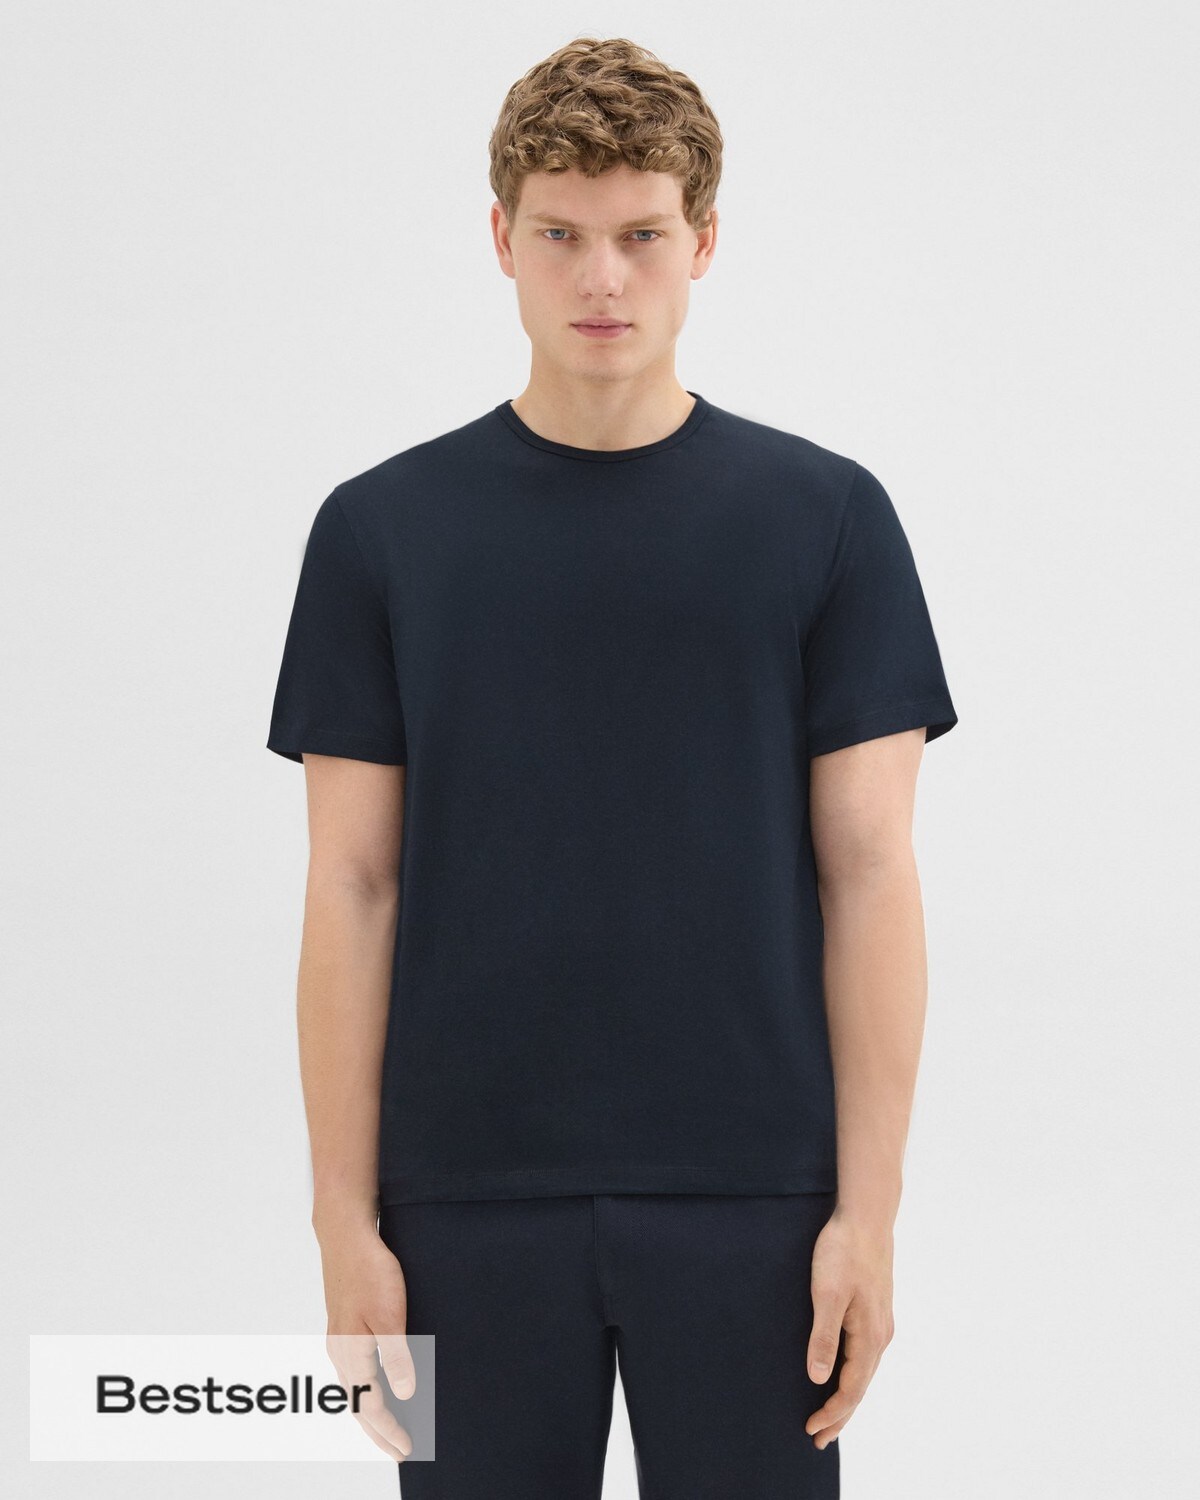 Men's T-Shirts and Polos| Theory